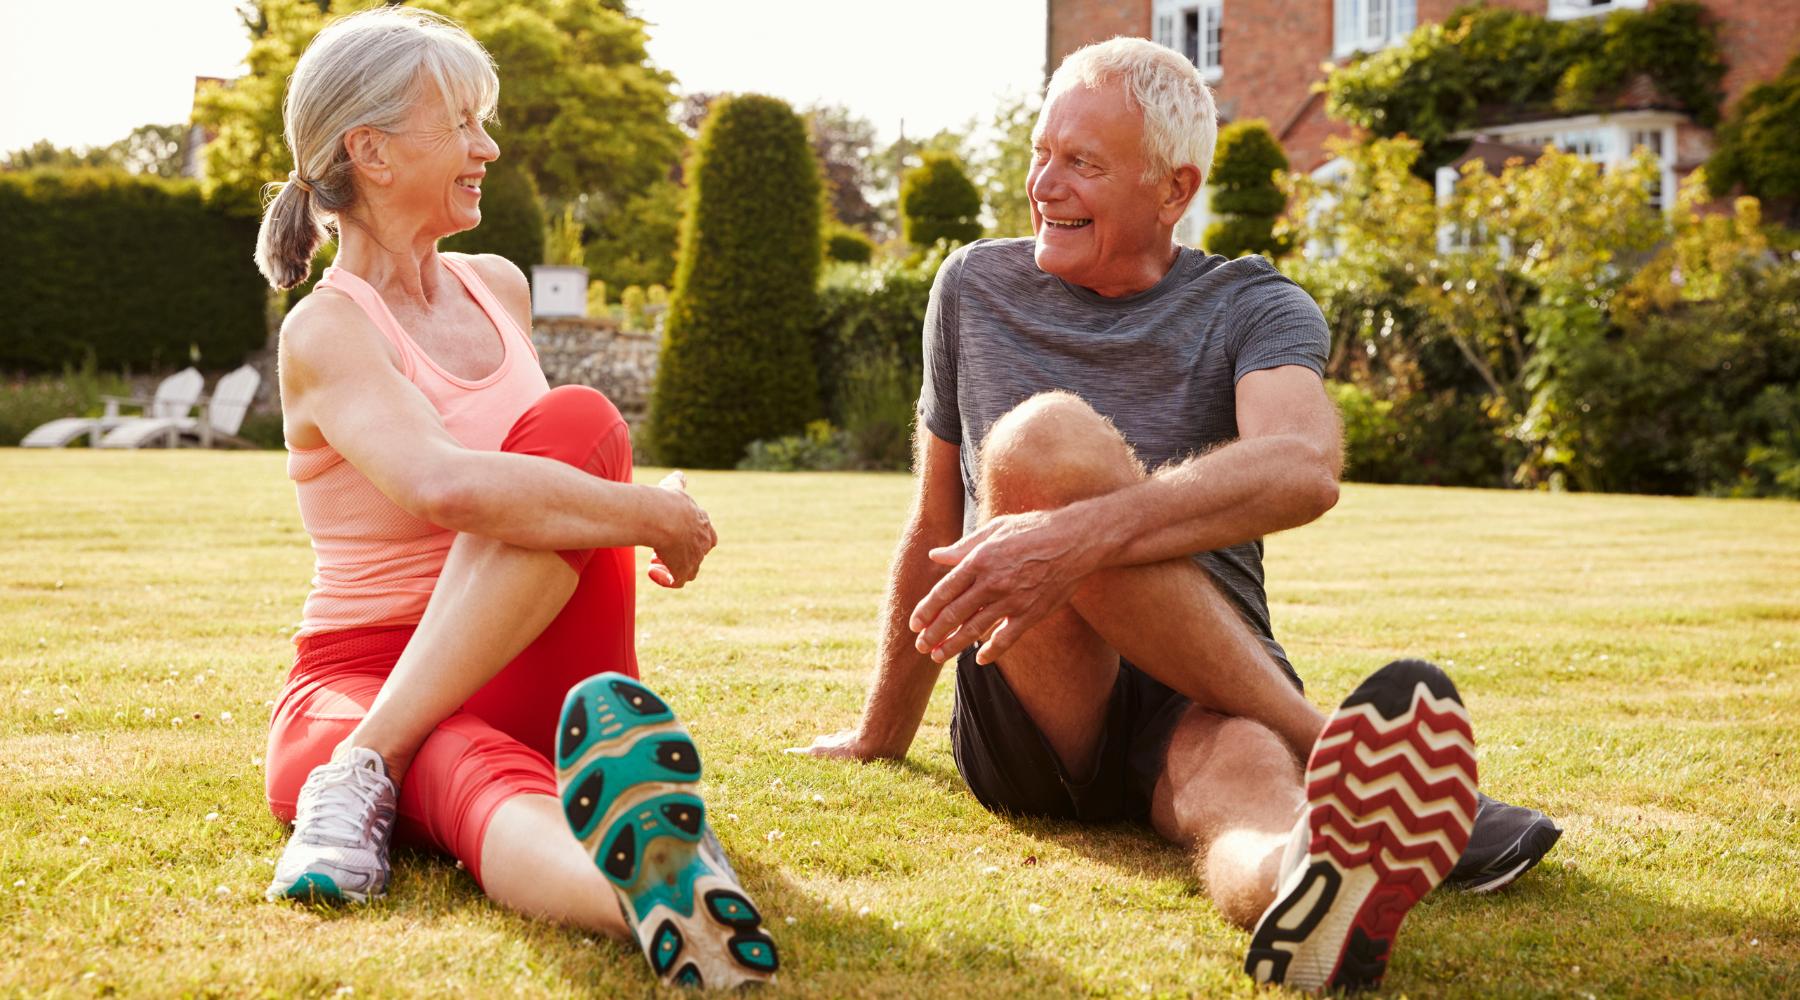 Senior couple stretching outdoors before working out for healthier lifestyle